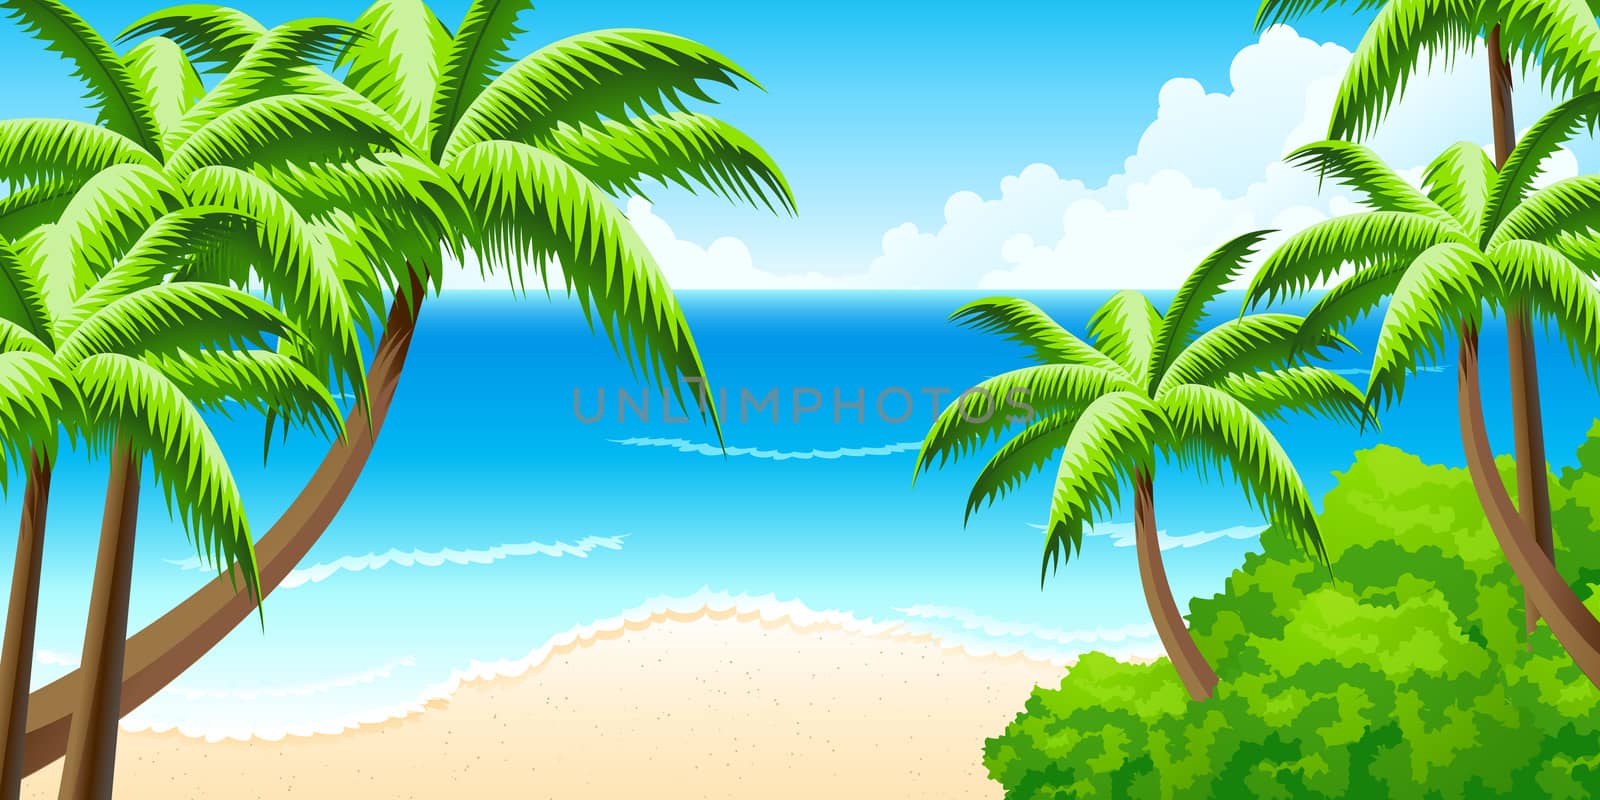 Tropical Background with Sea Palms and Beach